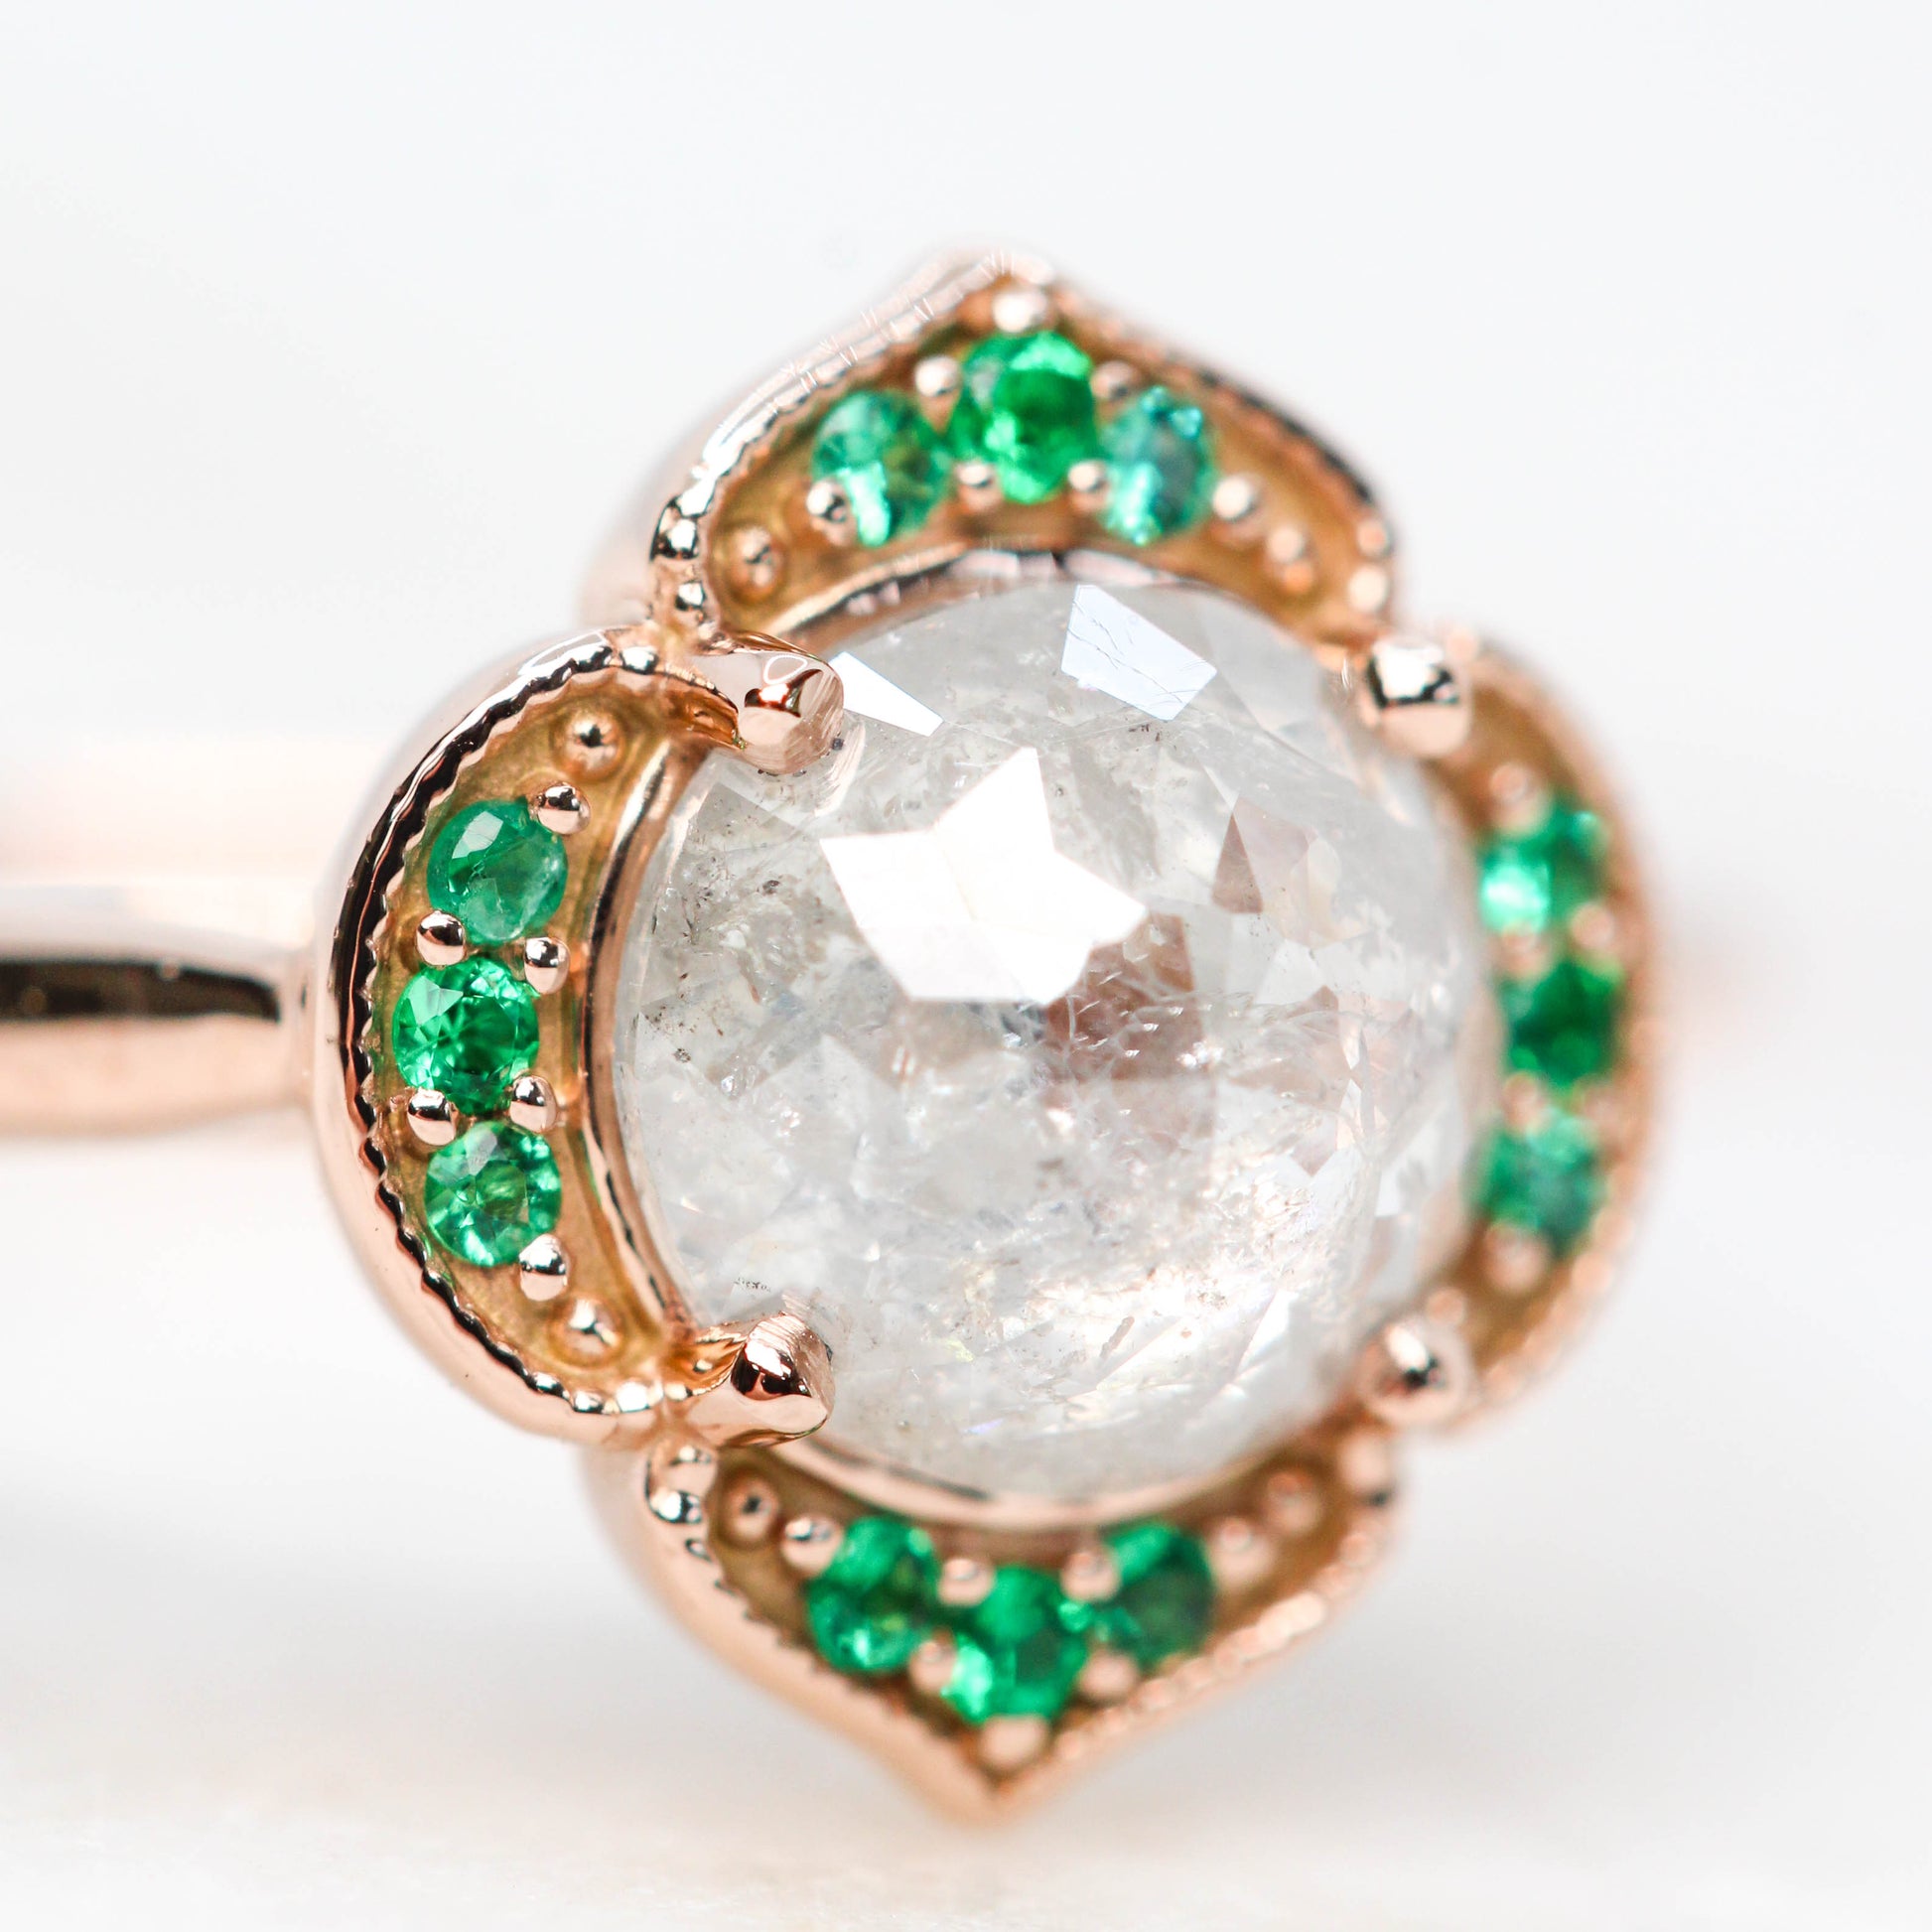 Clementine Ring with a 0.83 Carat Round Misty White Diamond and Round Accent Emeralds in 14k Rose Gold - Ready to Size and Ship - Midwinter Co. Alternative Bridal Rings and Modern Fine Jewelry